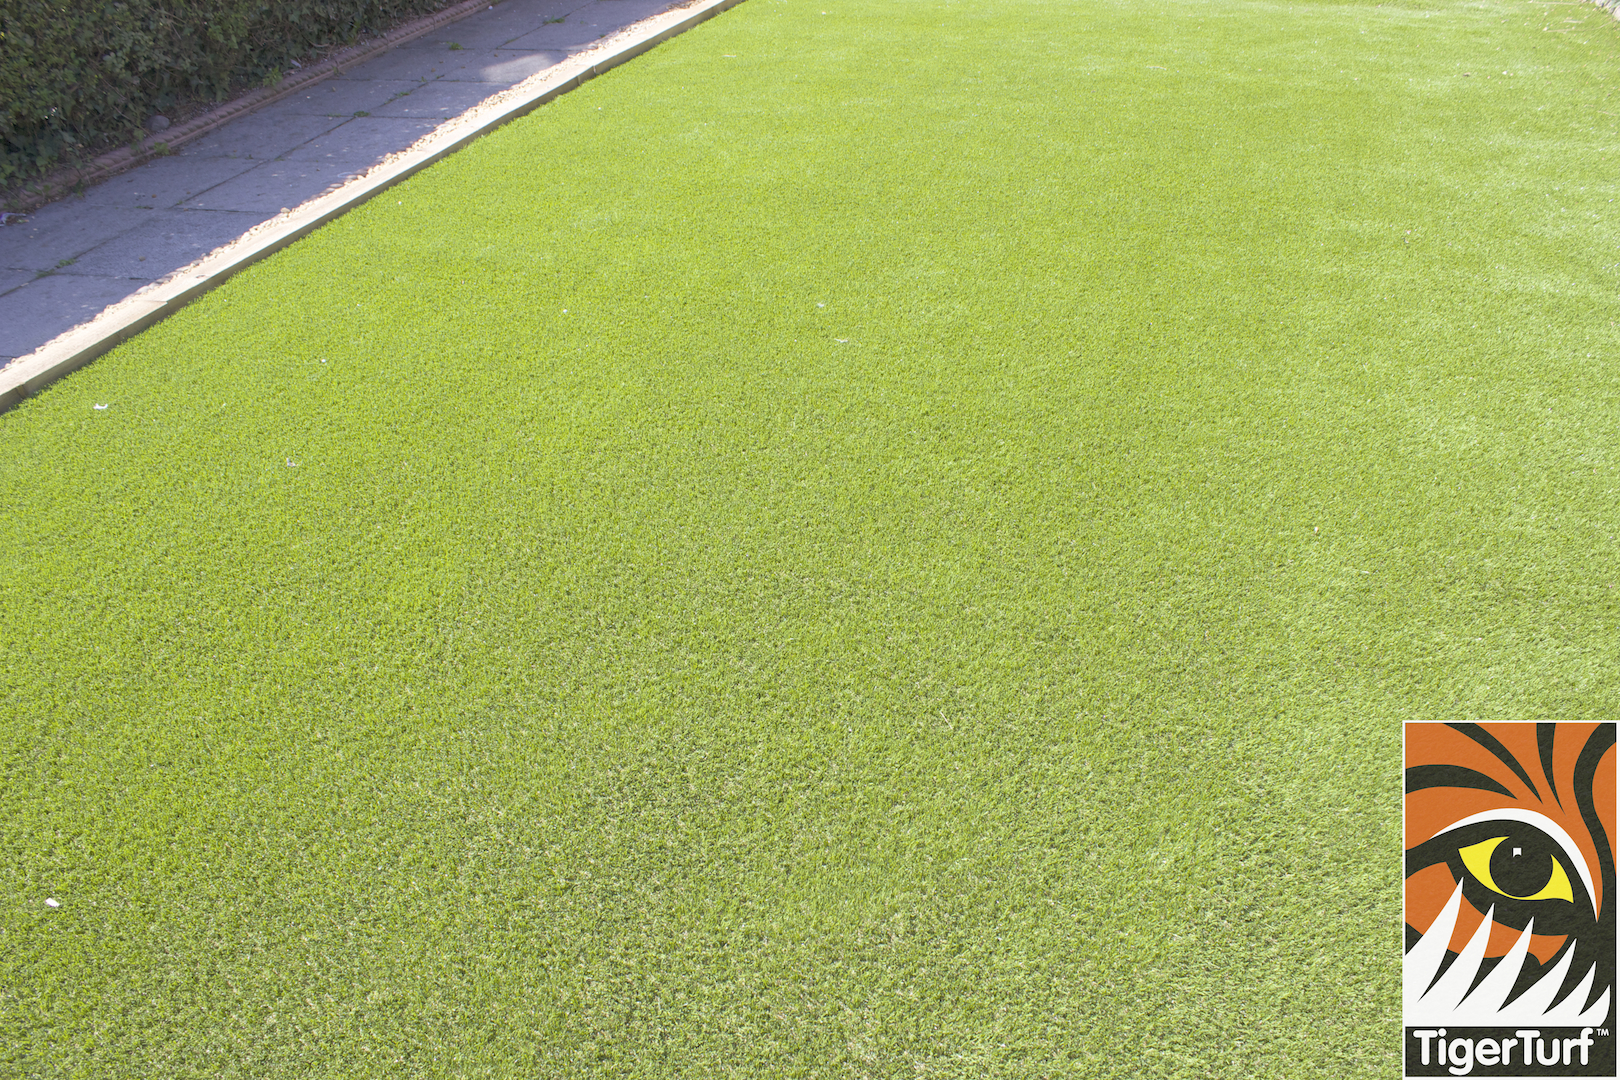 TigerTurf Finesse Deluxe lawn